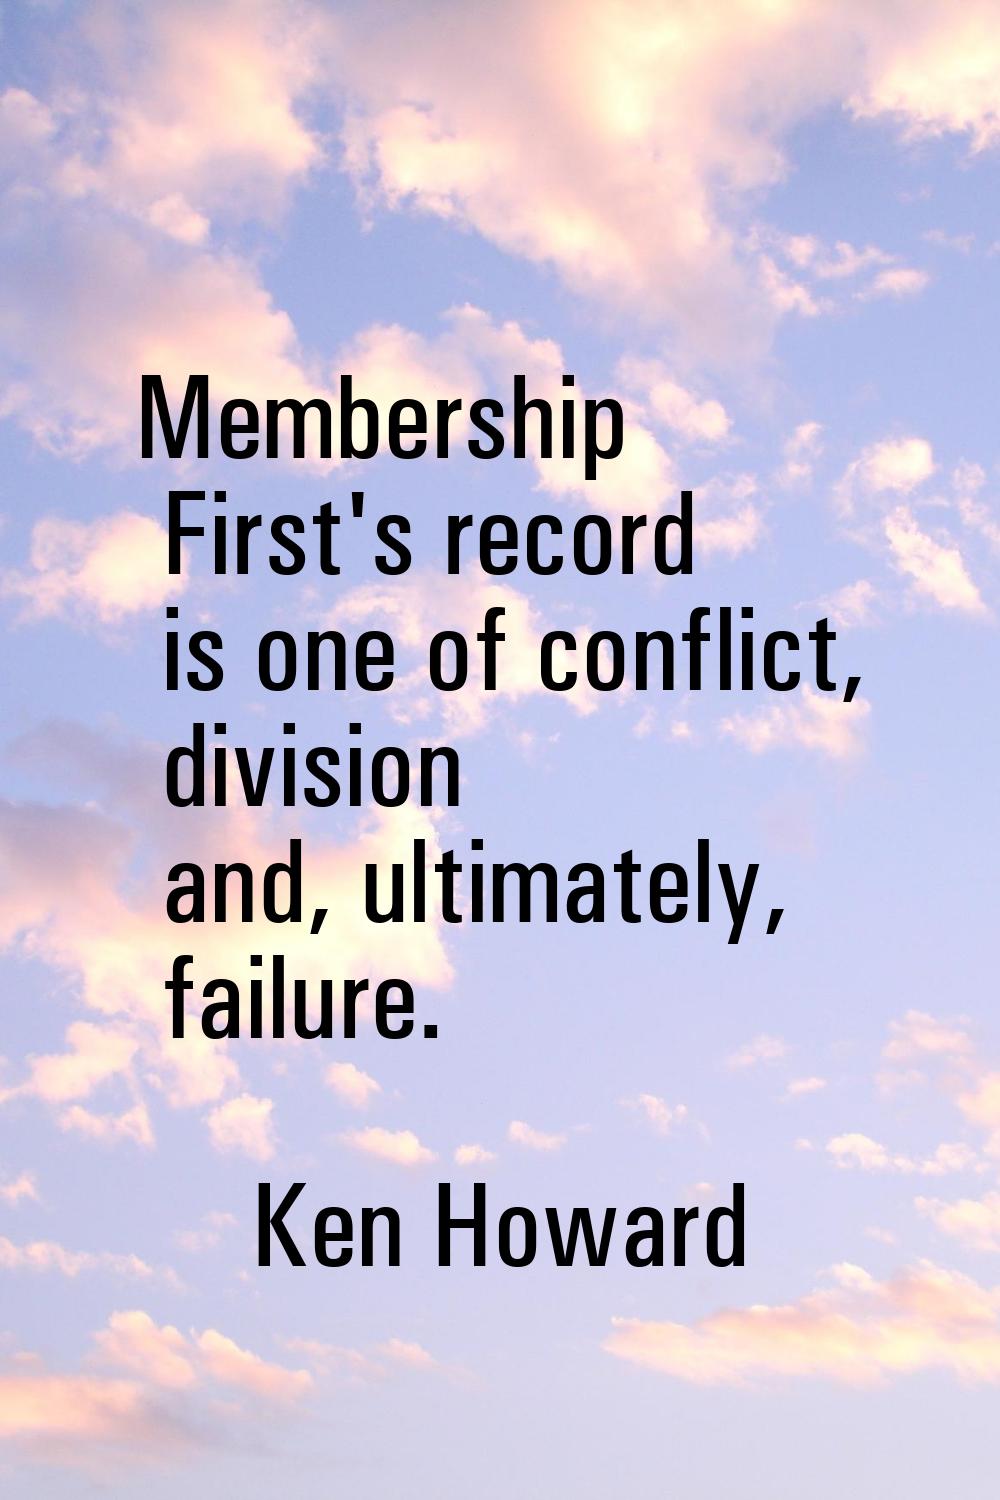 Membership First's record is one of conflict, division and, ultimately, failure.